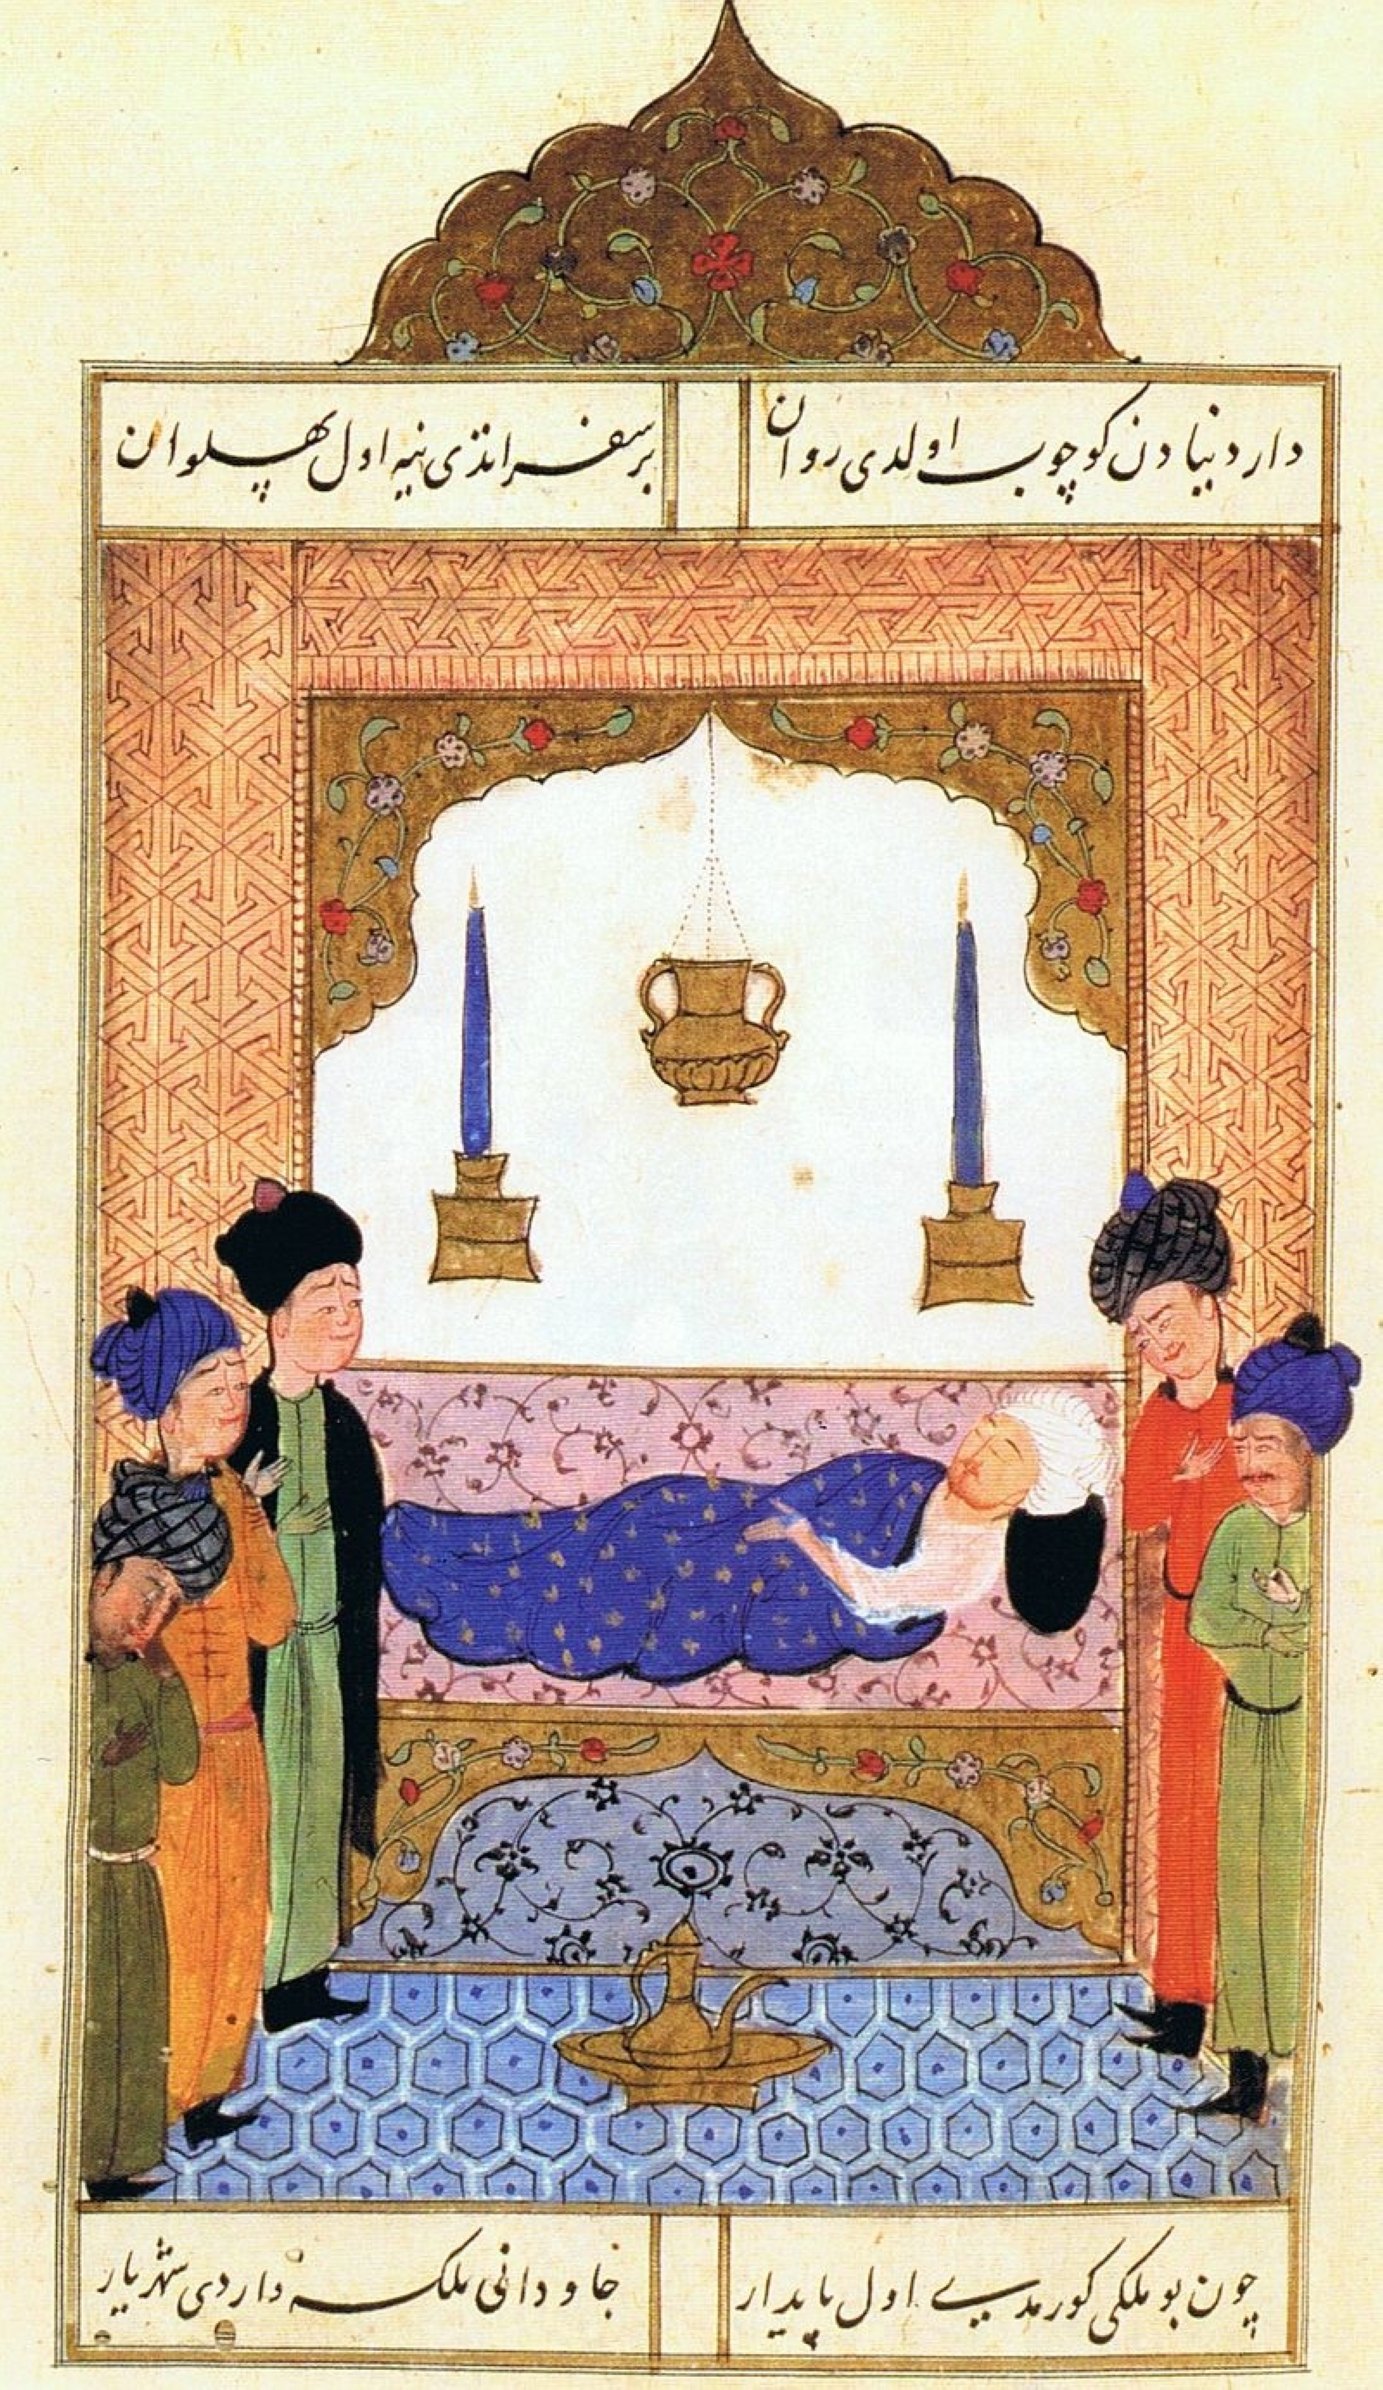 An Ottoman miniature depicts Sultan Selim I on his deathbed.